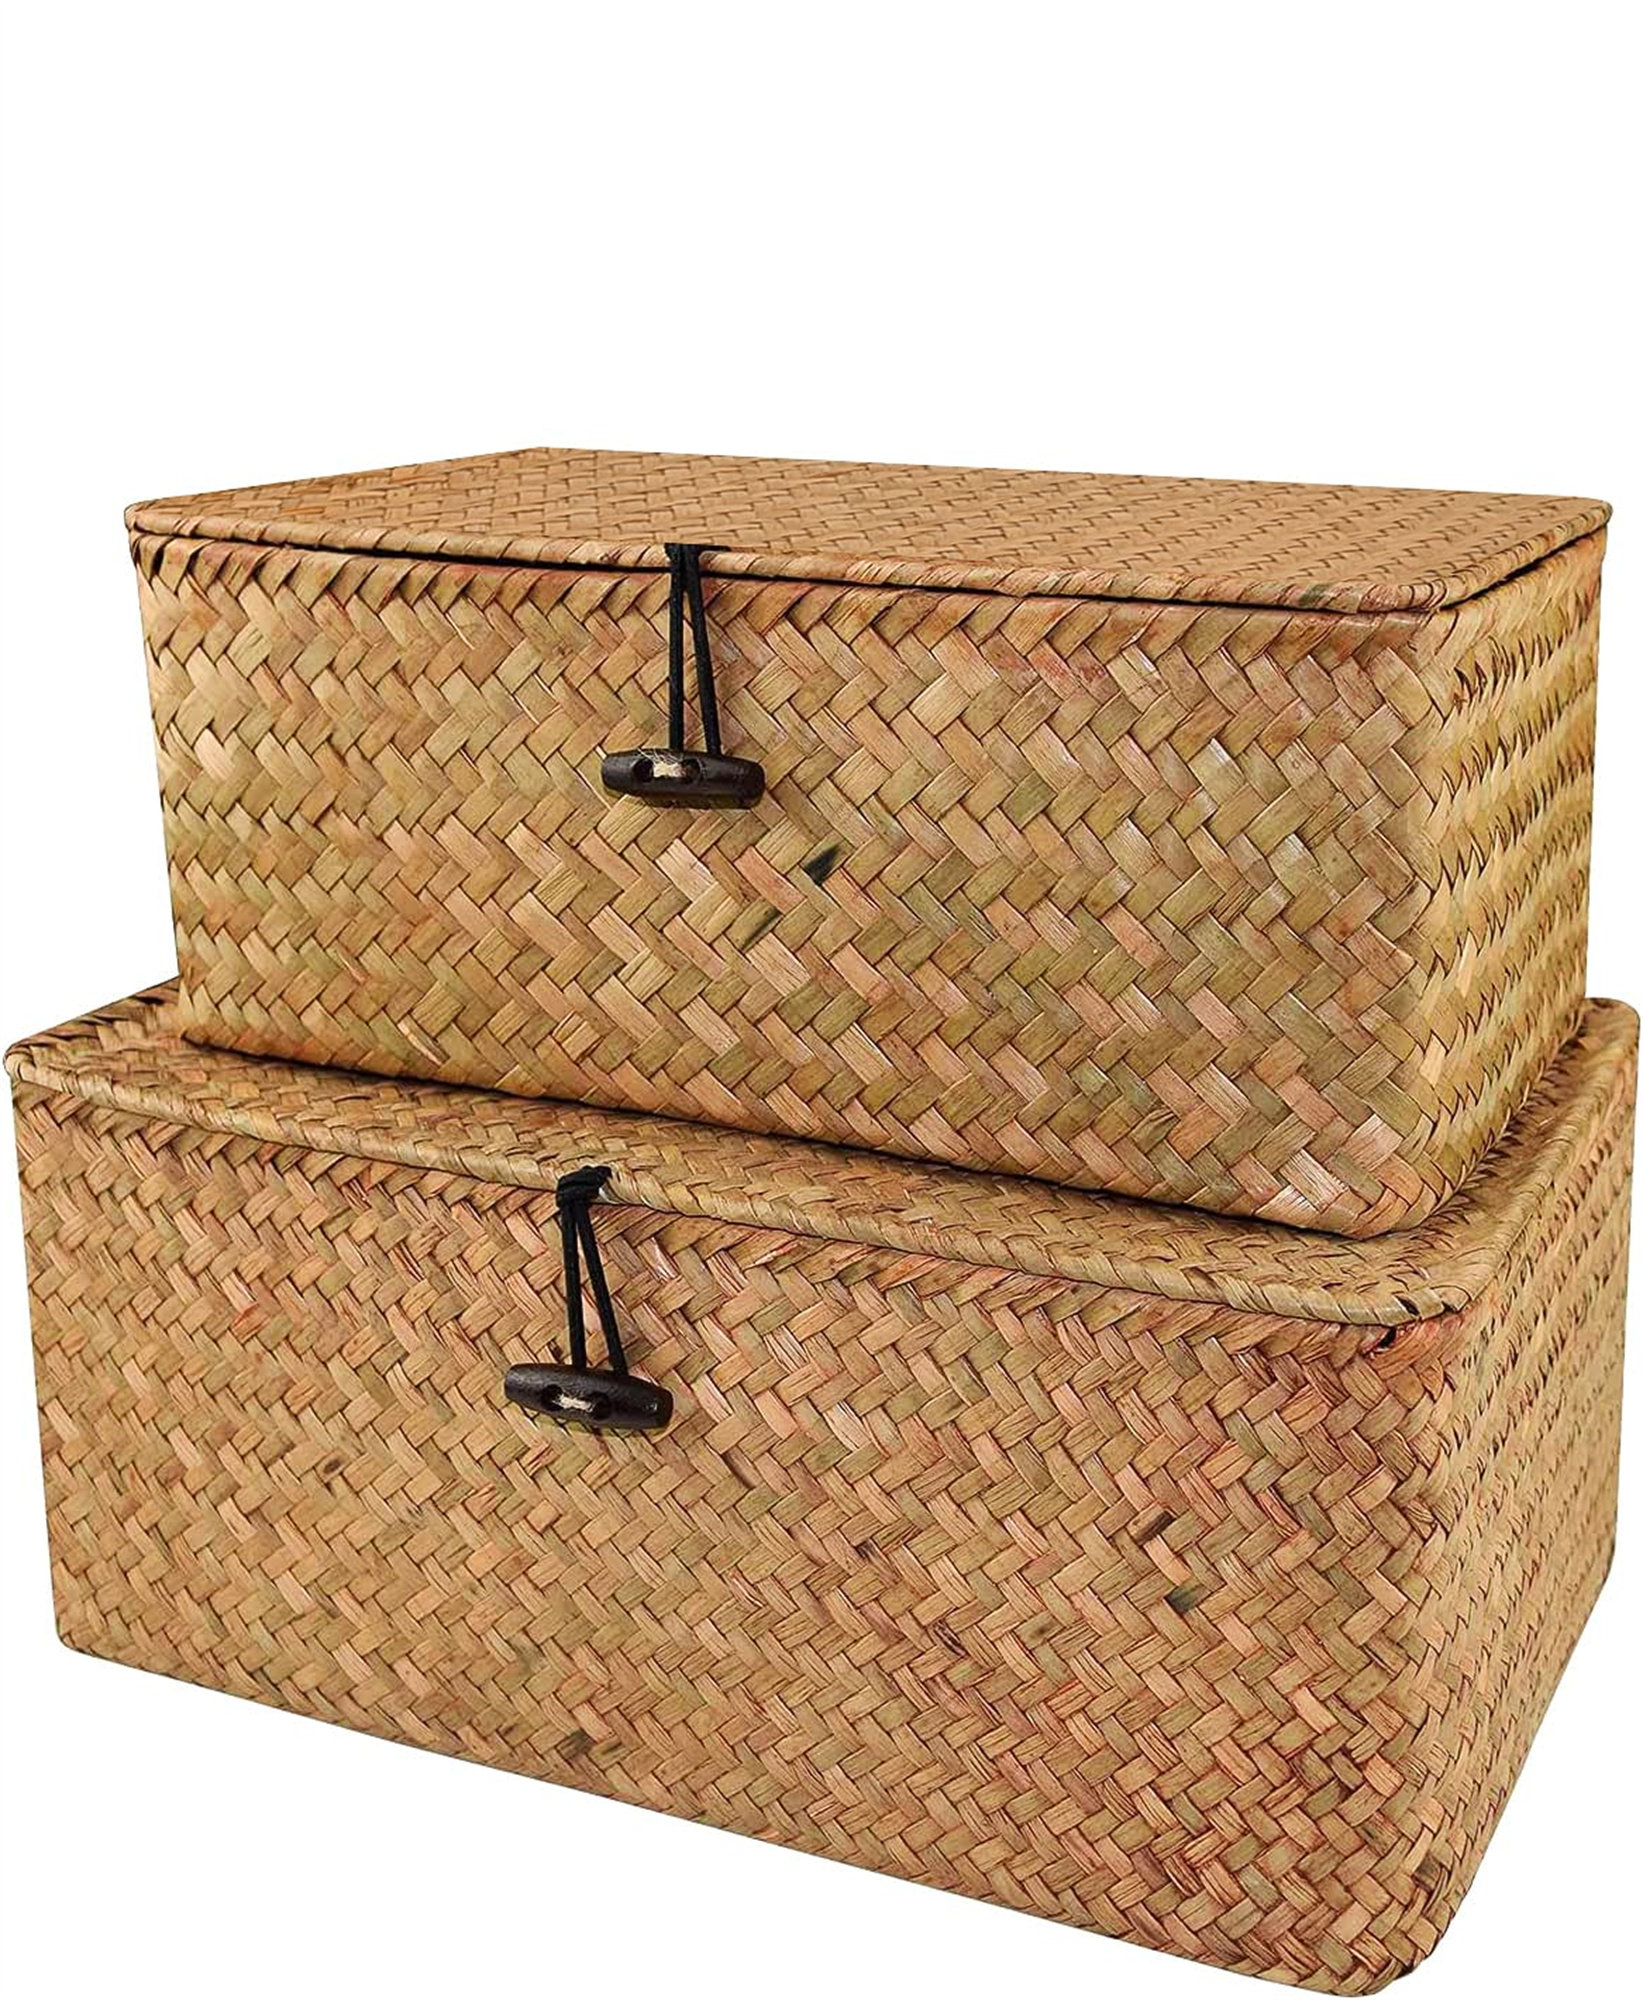 Bay Isle Home Wicker Storage Box With Lid, Natural Hand-Woven